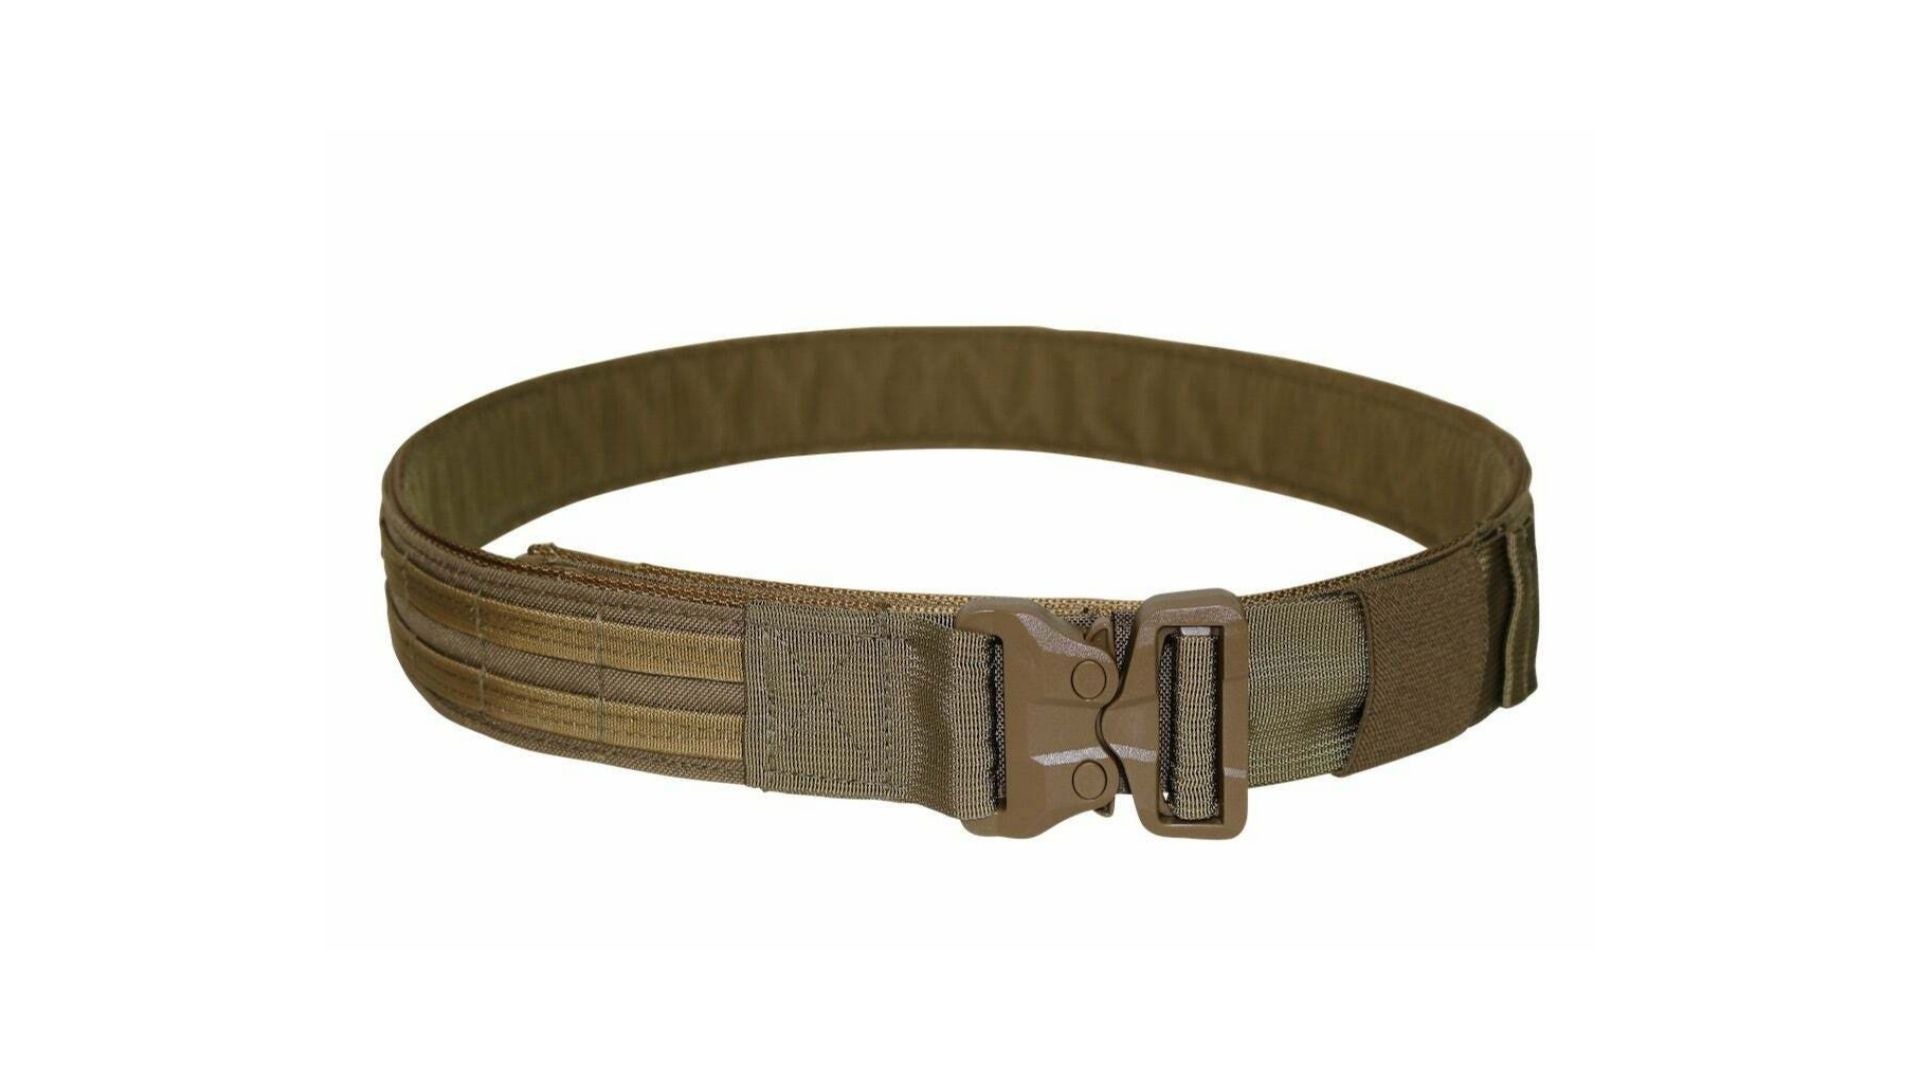 QX Mens Riggers Tactical Belt Military Style Nylon Webbing Outdoor Security Combat Belt for Military Training